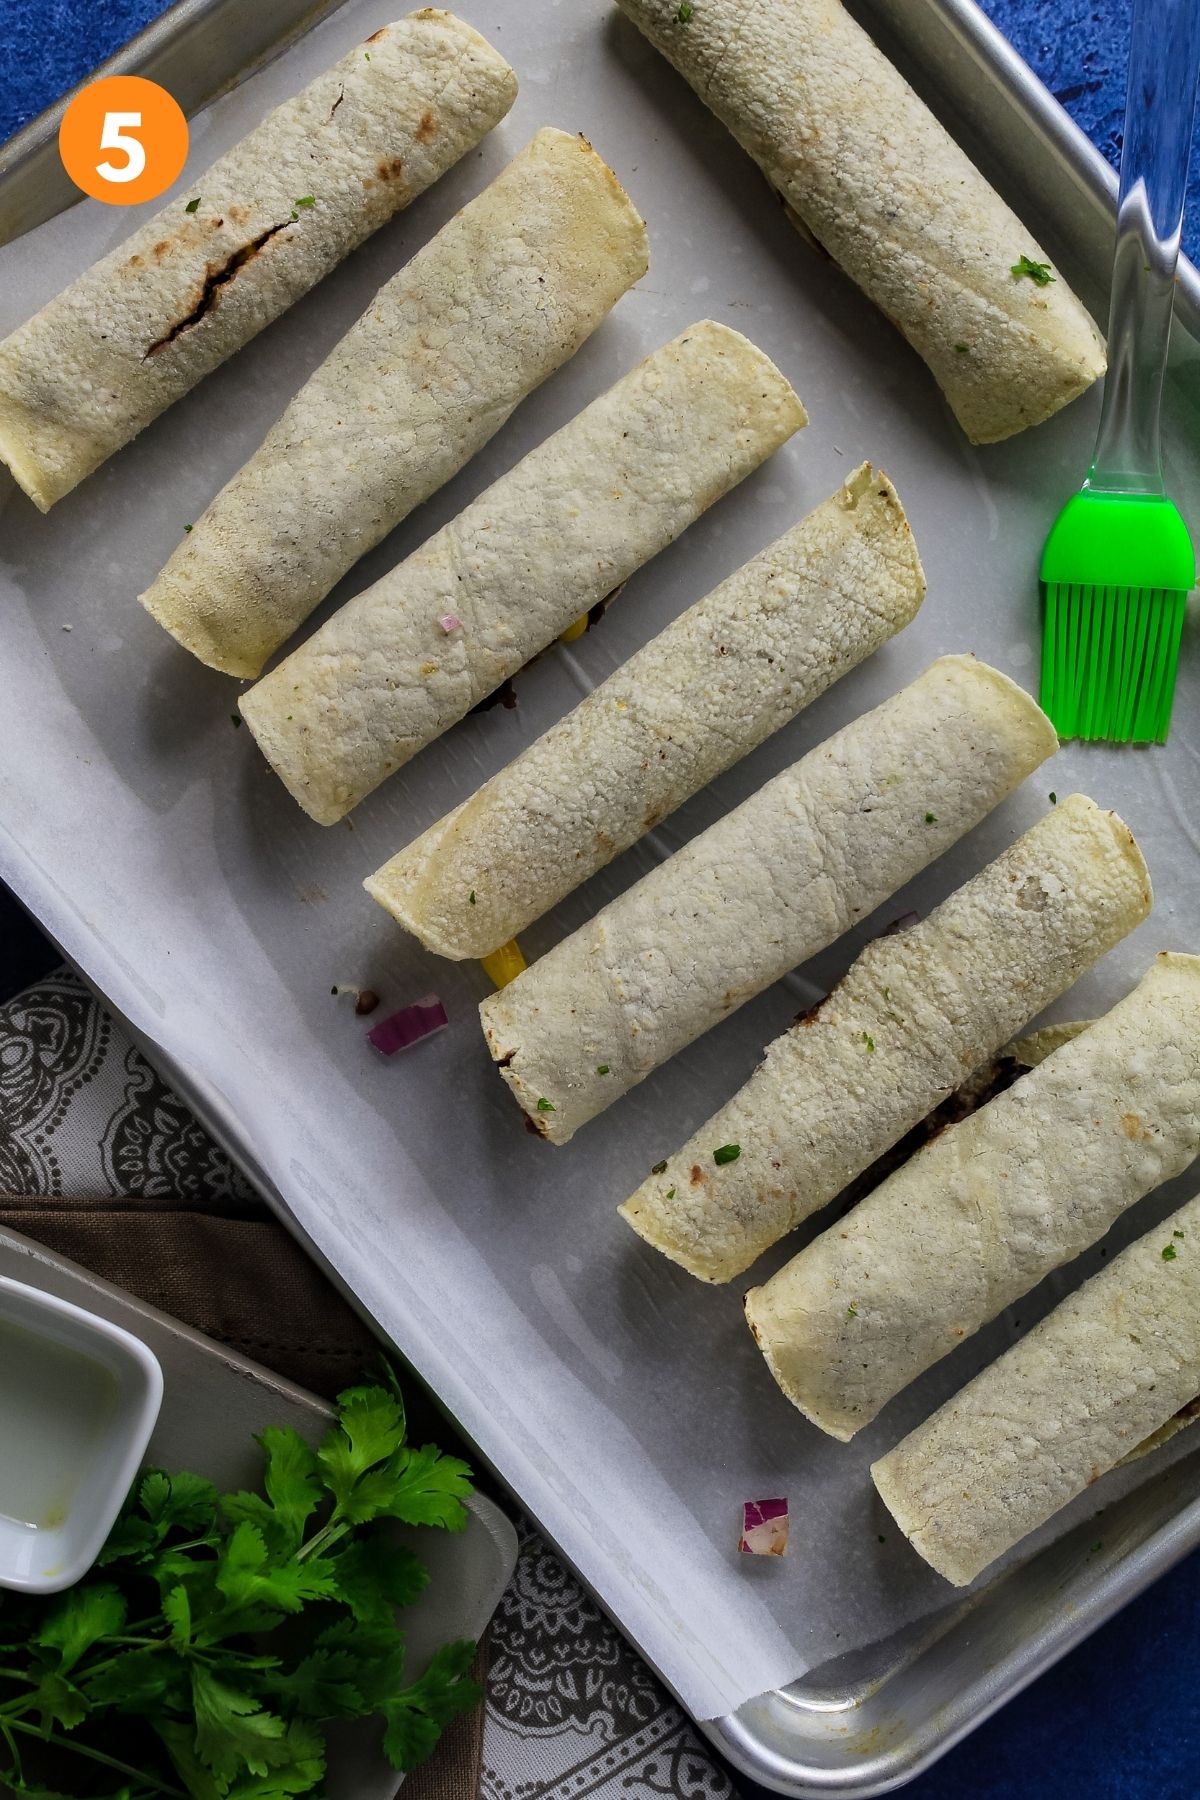 Rolled uncooked taquitos on baking sheet.